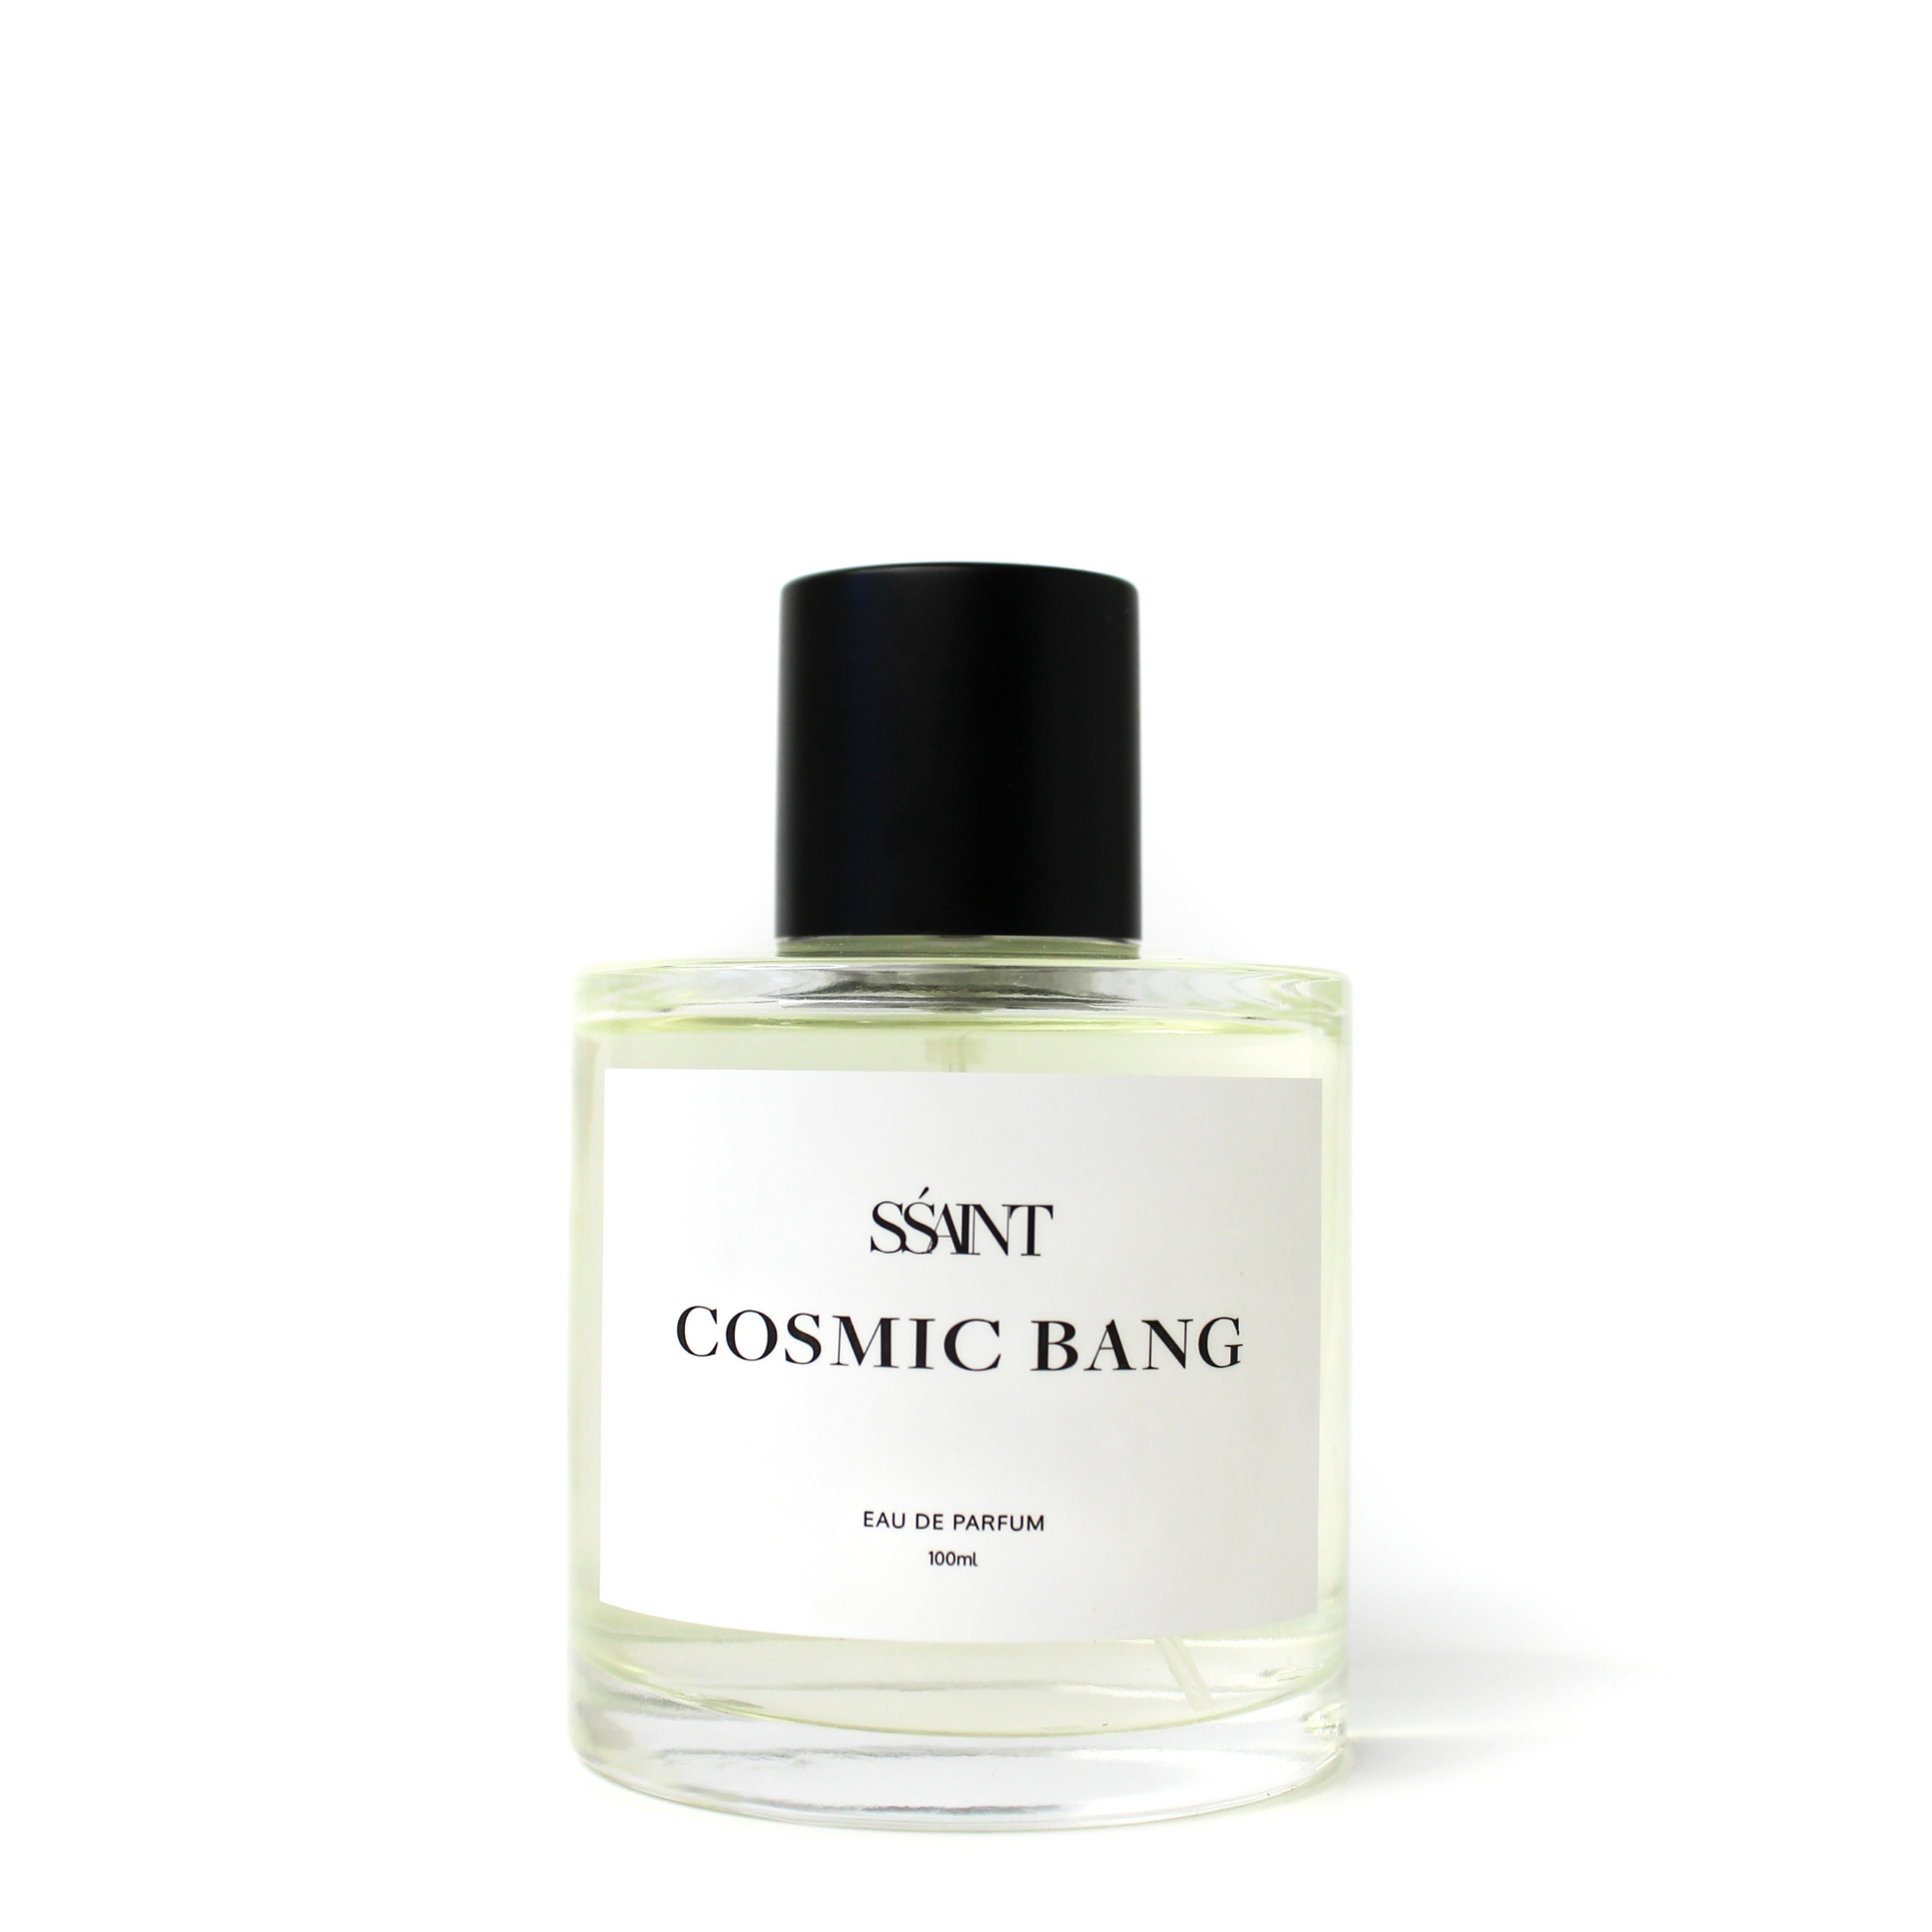 Like the arresting nostalgia of an ocean tide at midnight, it is lightning’s crack wrapped soulfully in silk, a complex fusion of mystery and equilibrium.

The androgynous scents of black tea, bay leaf, hay, bergamot and tobacco transport oneself to an ancient earth accentuated by the delicacies of musk, fig and cedar.

 Unisex fragrance with the below notes:

Fig, Bergamot, Bay Leaf

Musk, Vetiver, Cedar